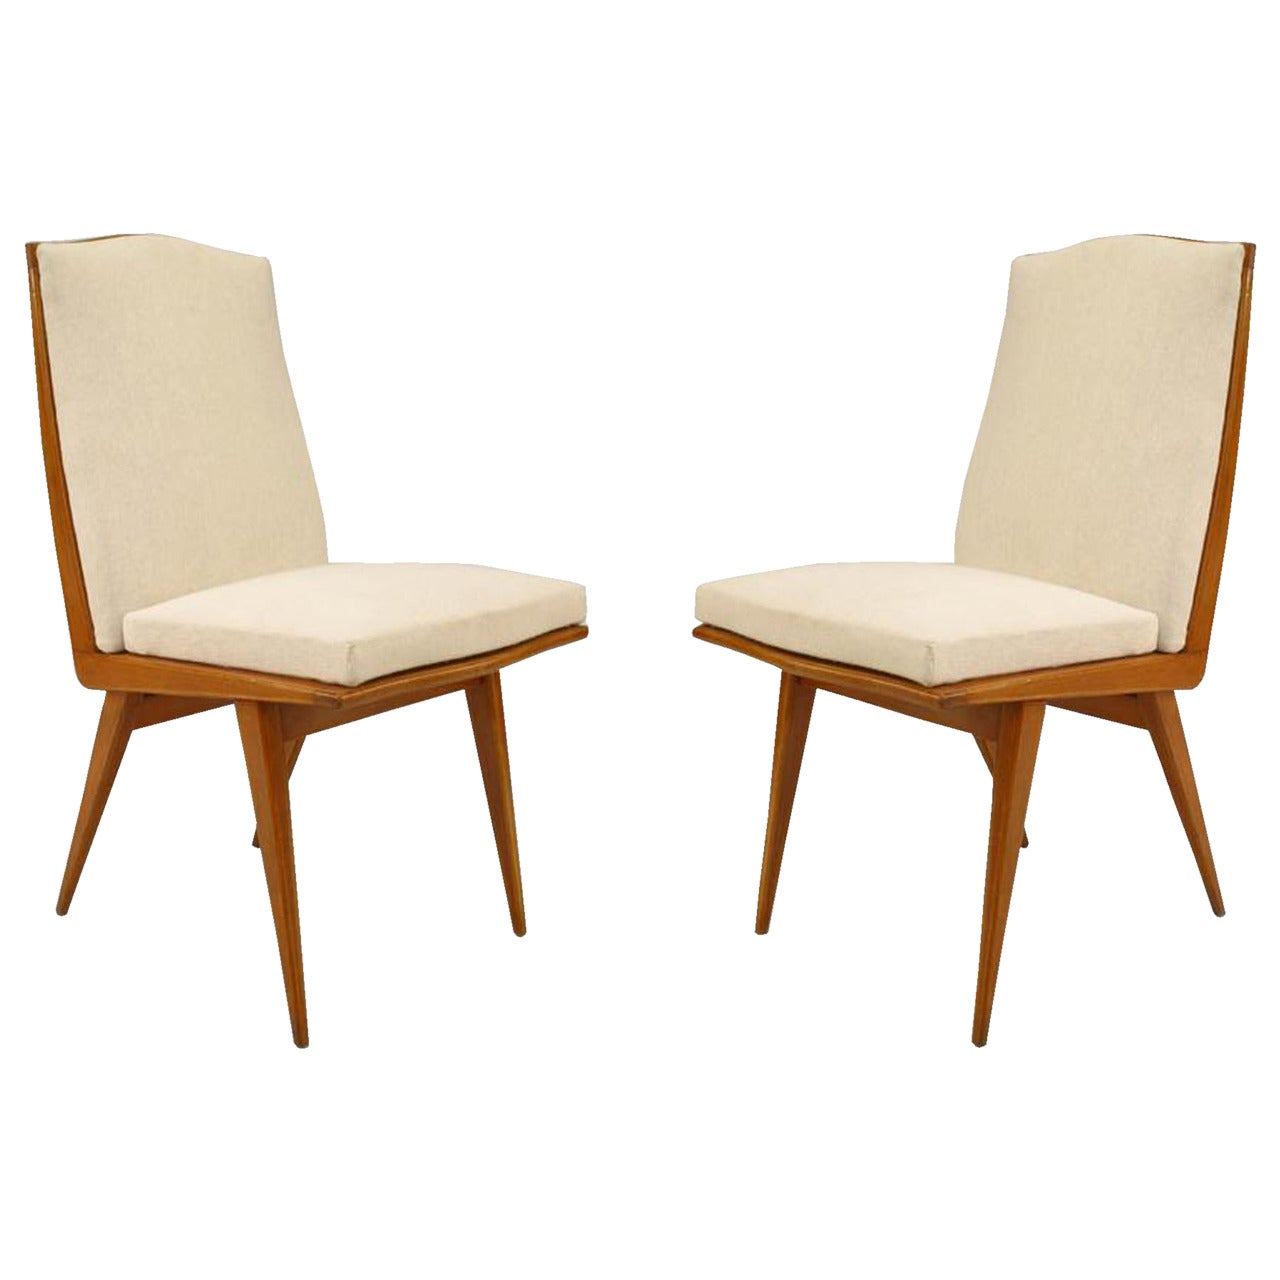 Pair of Italian Blond Mahogany Side Chairs For Sale